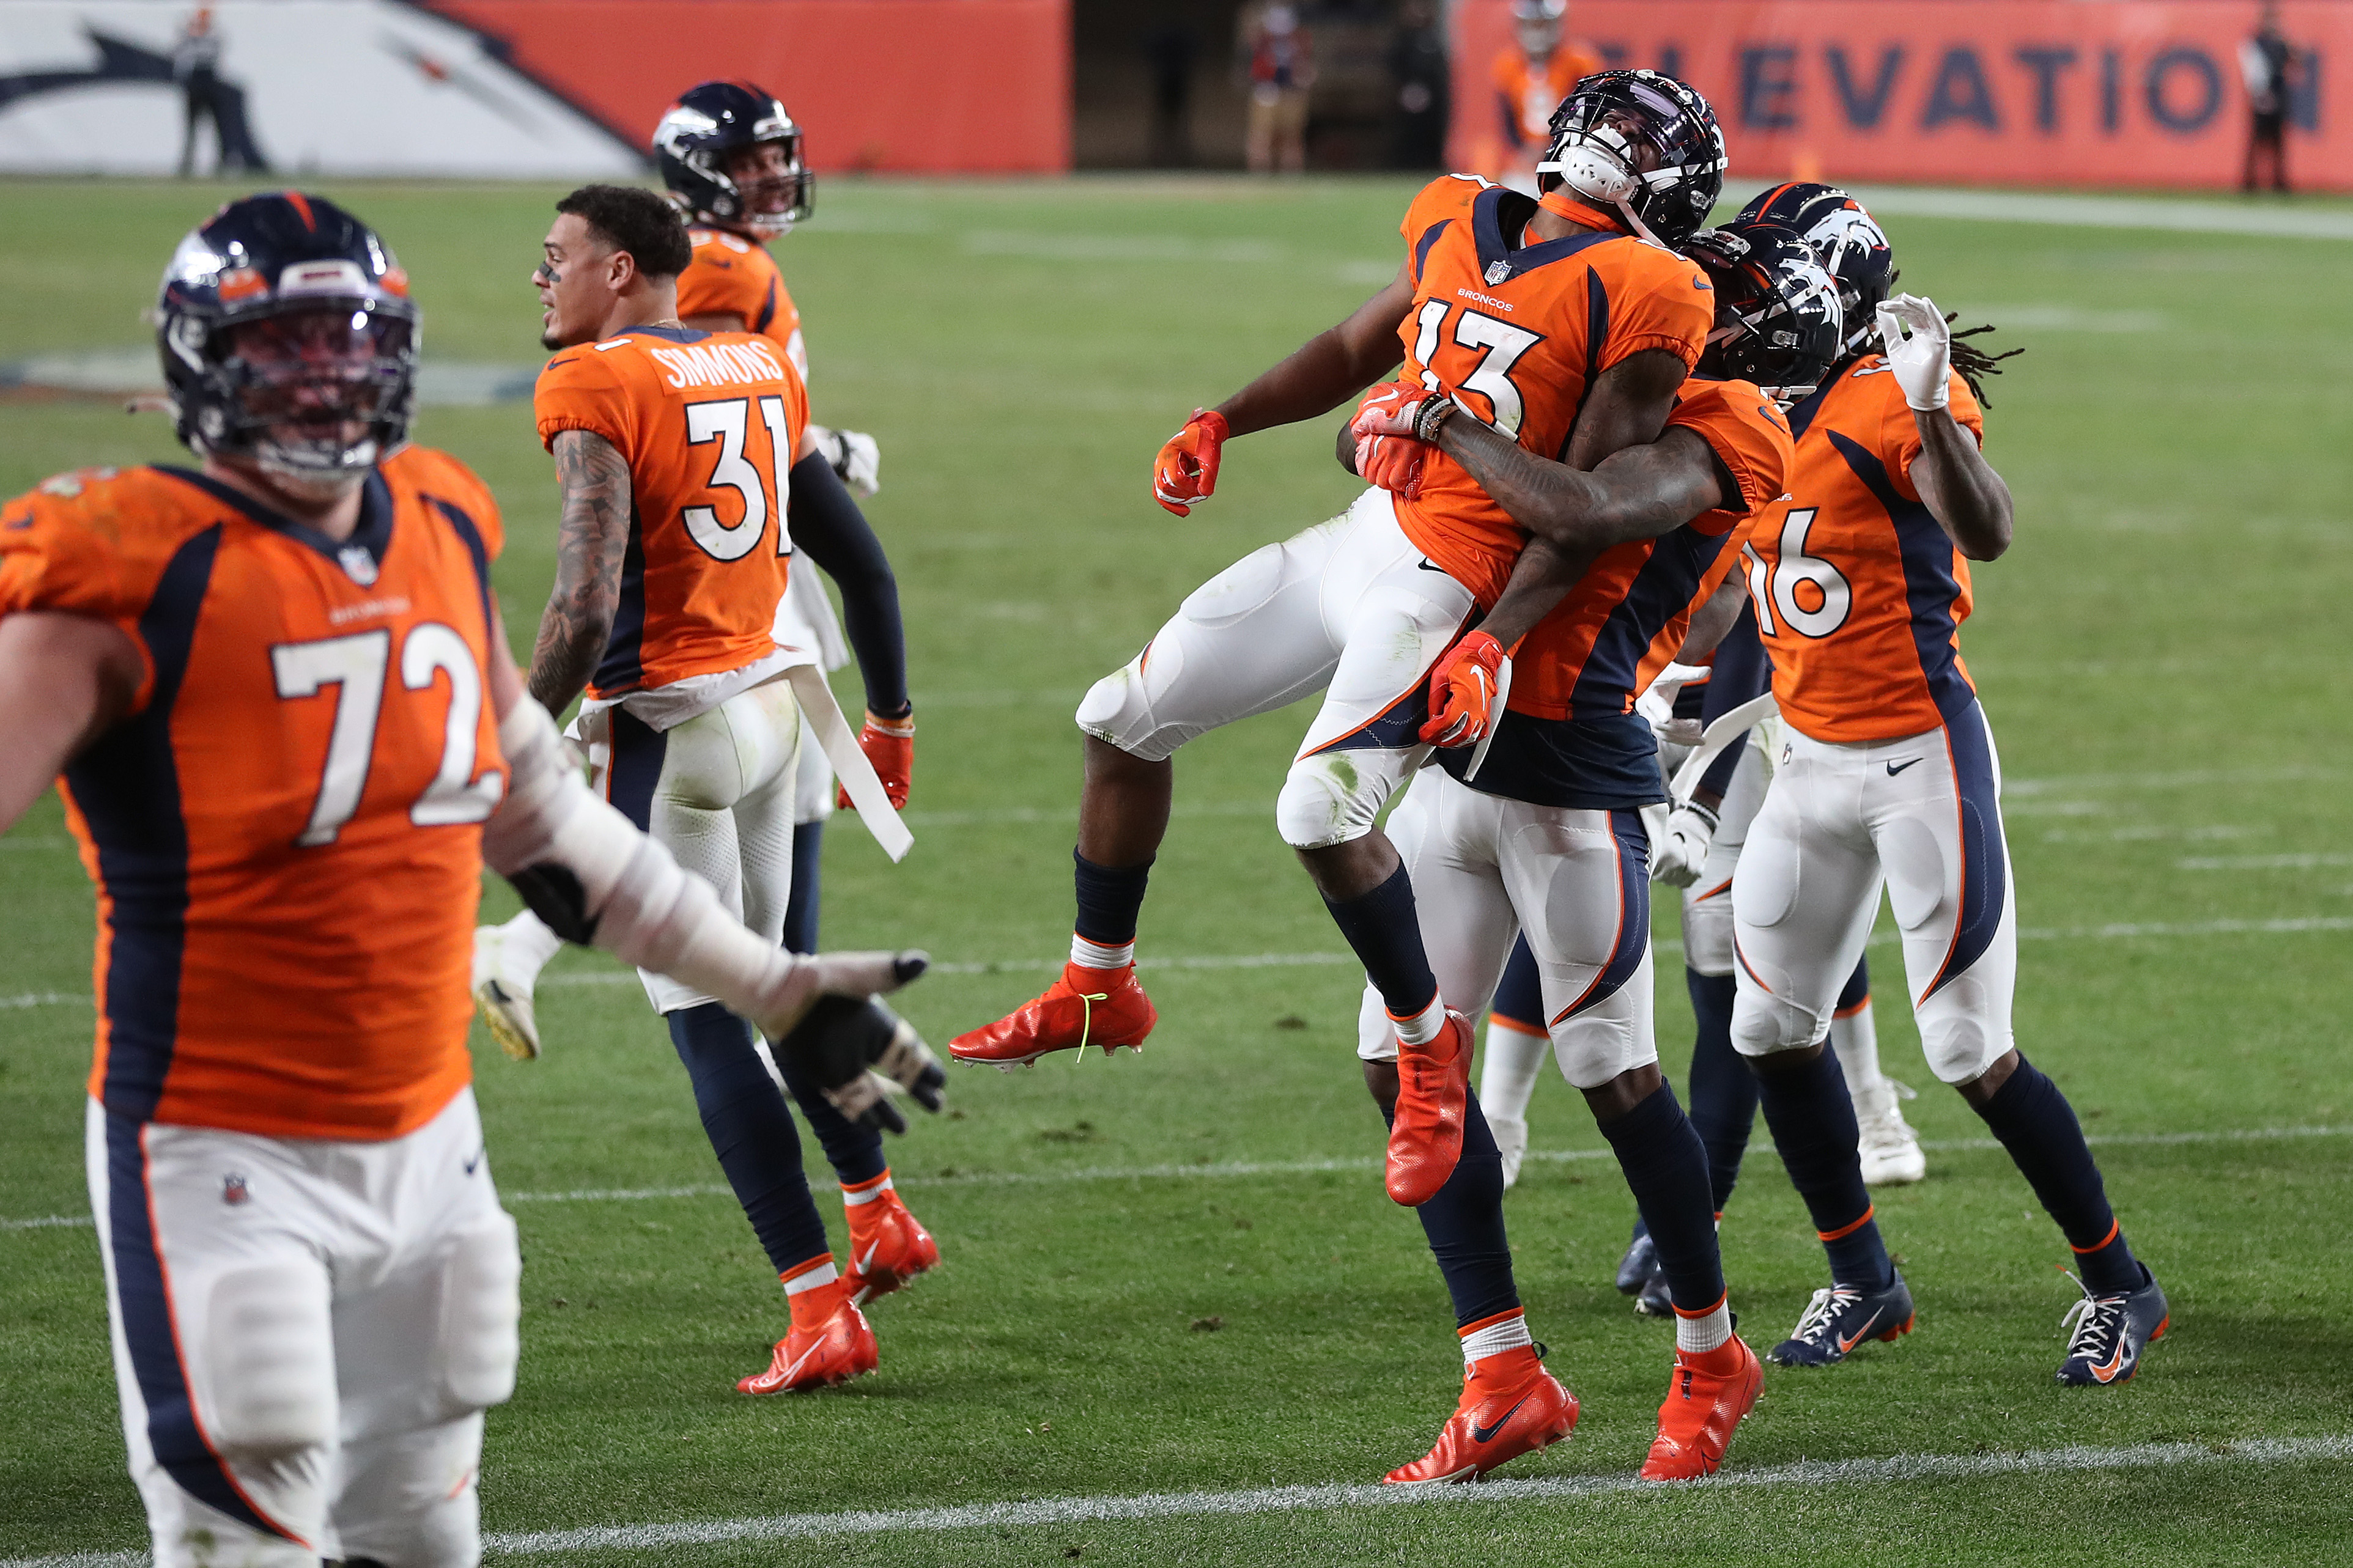 KJ Hamler #13 of the Denver Broncos celebrates with teammates after scoring a touchdown against the Los Angeles Chargers at the end of the fourth quarter of the game at Empower Field At Mile High on November 01, 2020 in Denver, Colorado. The Denver Broncos won 31-30.